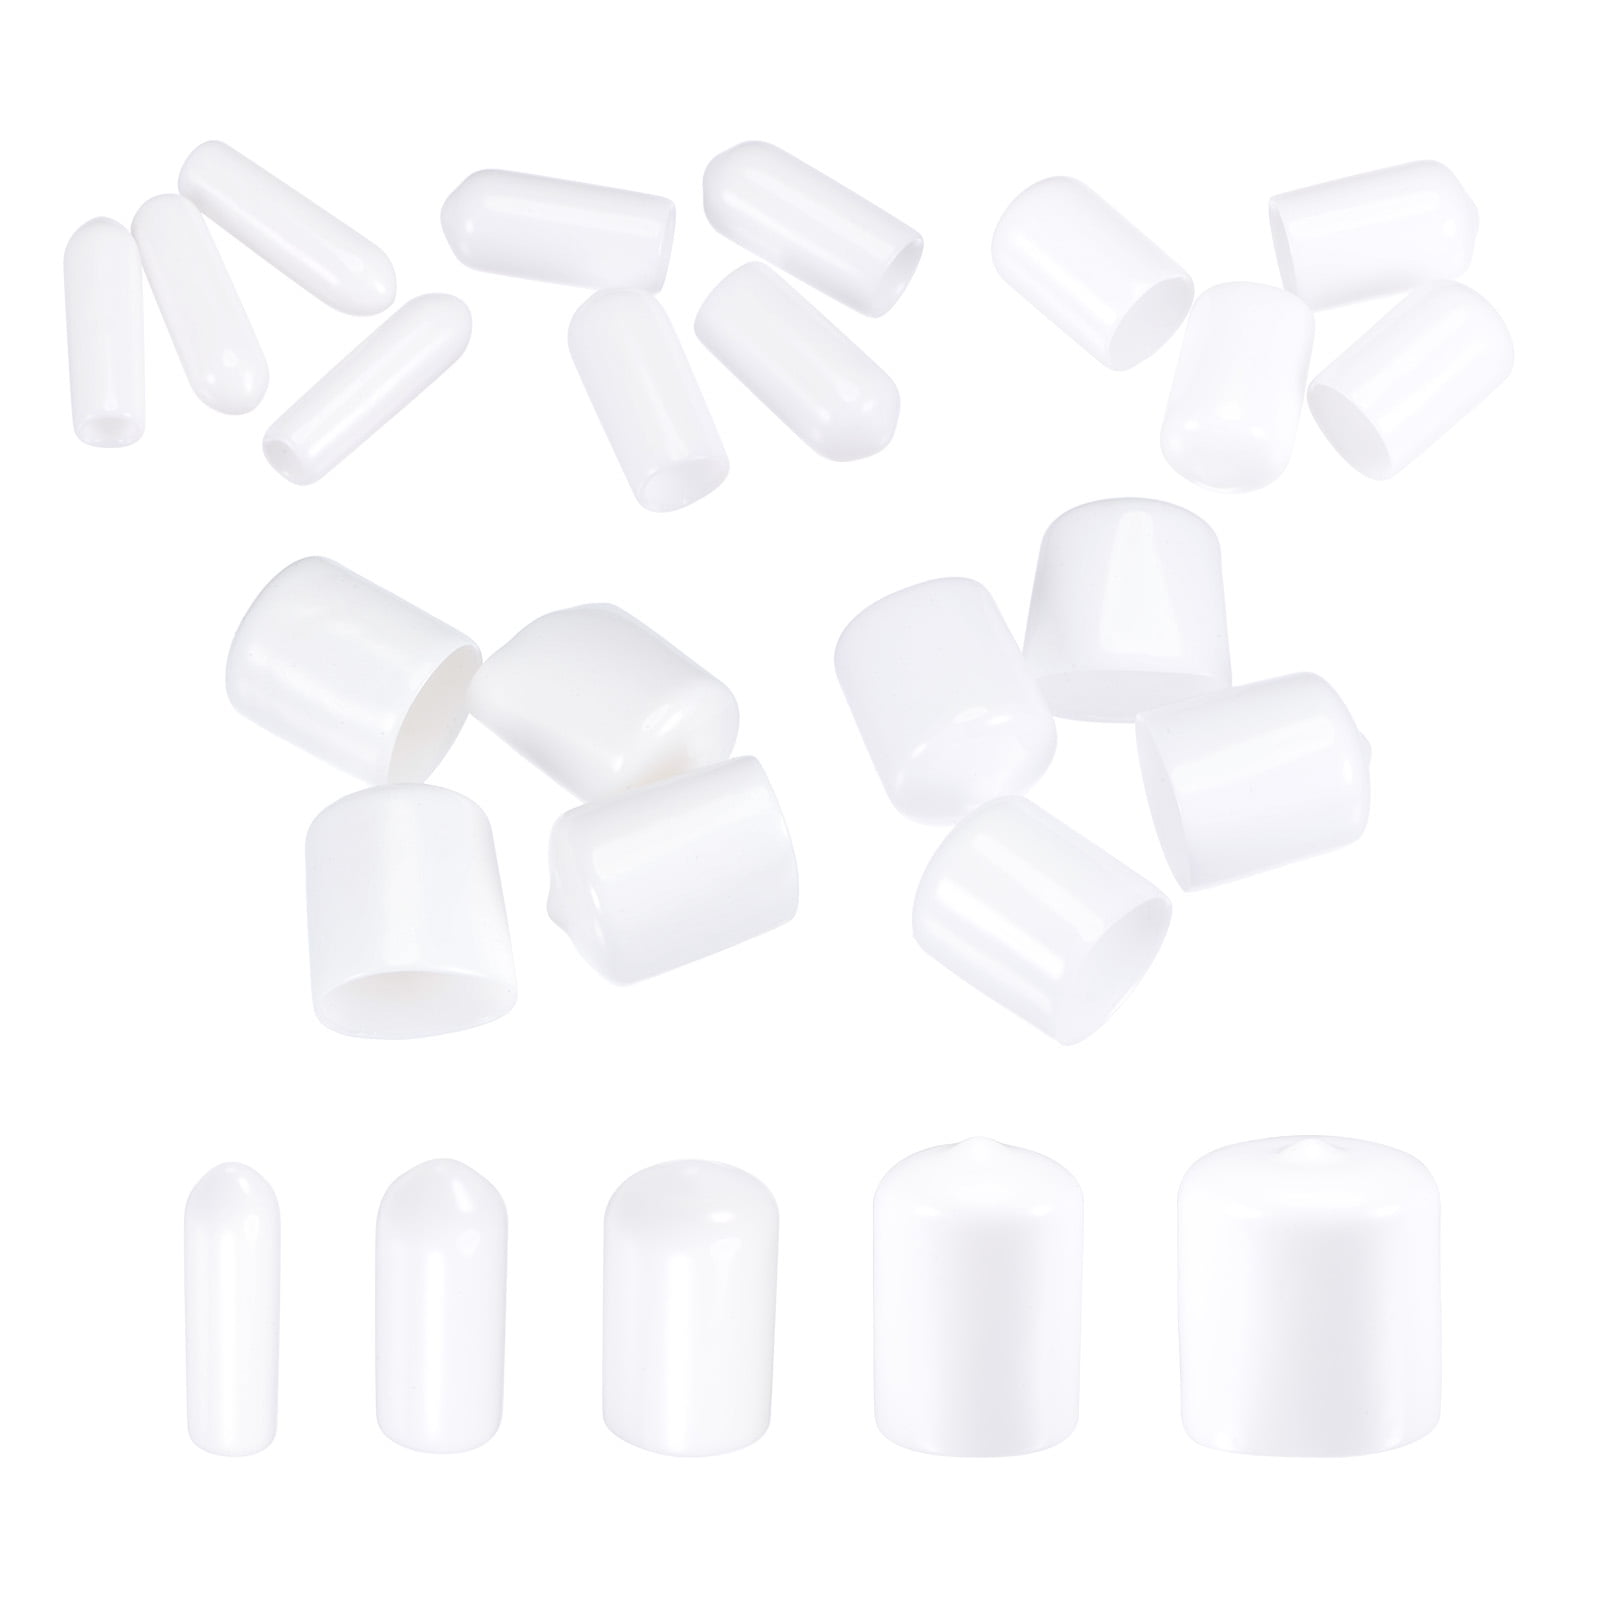 White Vinyl Cover Screw Thread Protectors 19mm uxcell 50pcs Round Rubber End Caps 3/4 